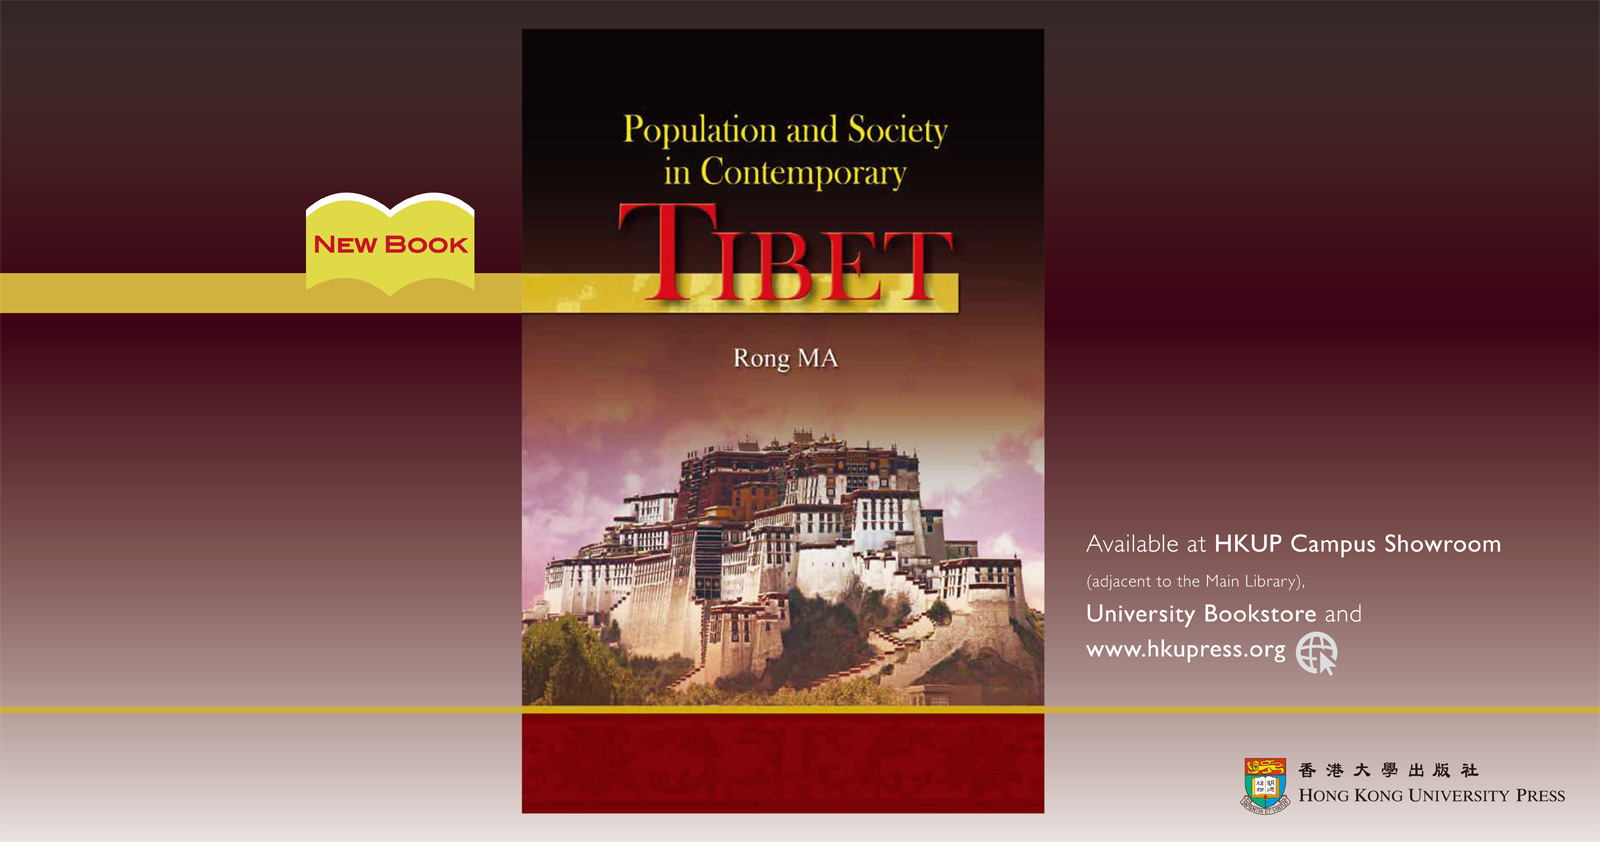 New book from HKUP - Population and Society in Contemporary Tibet